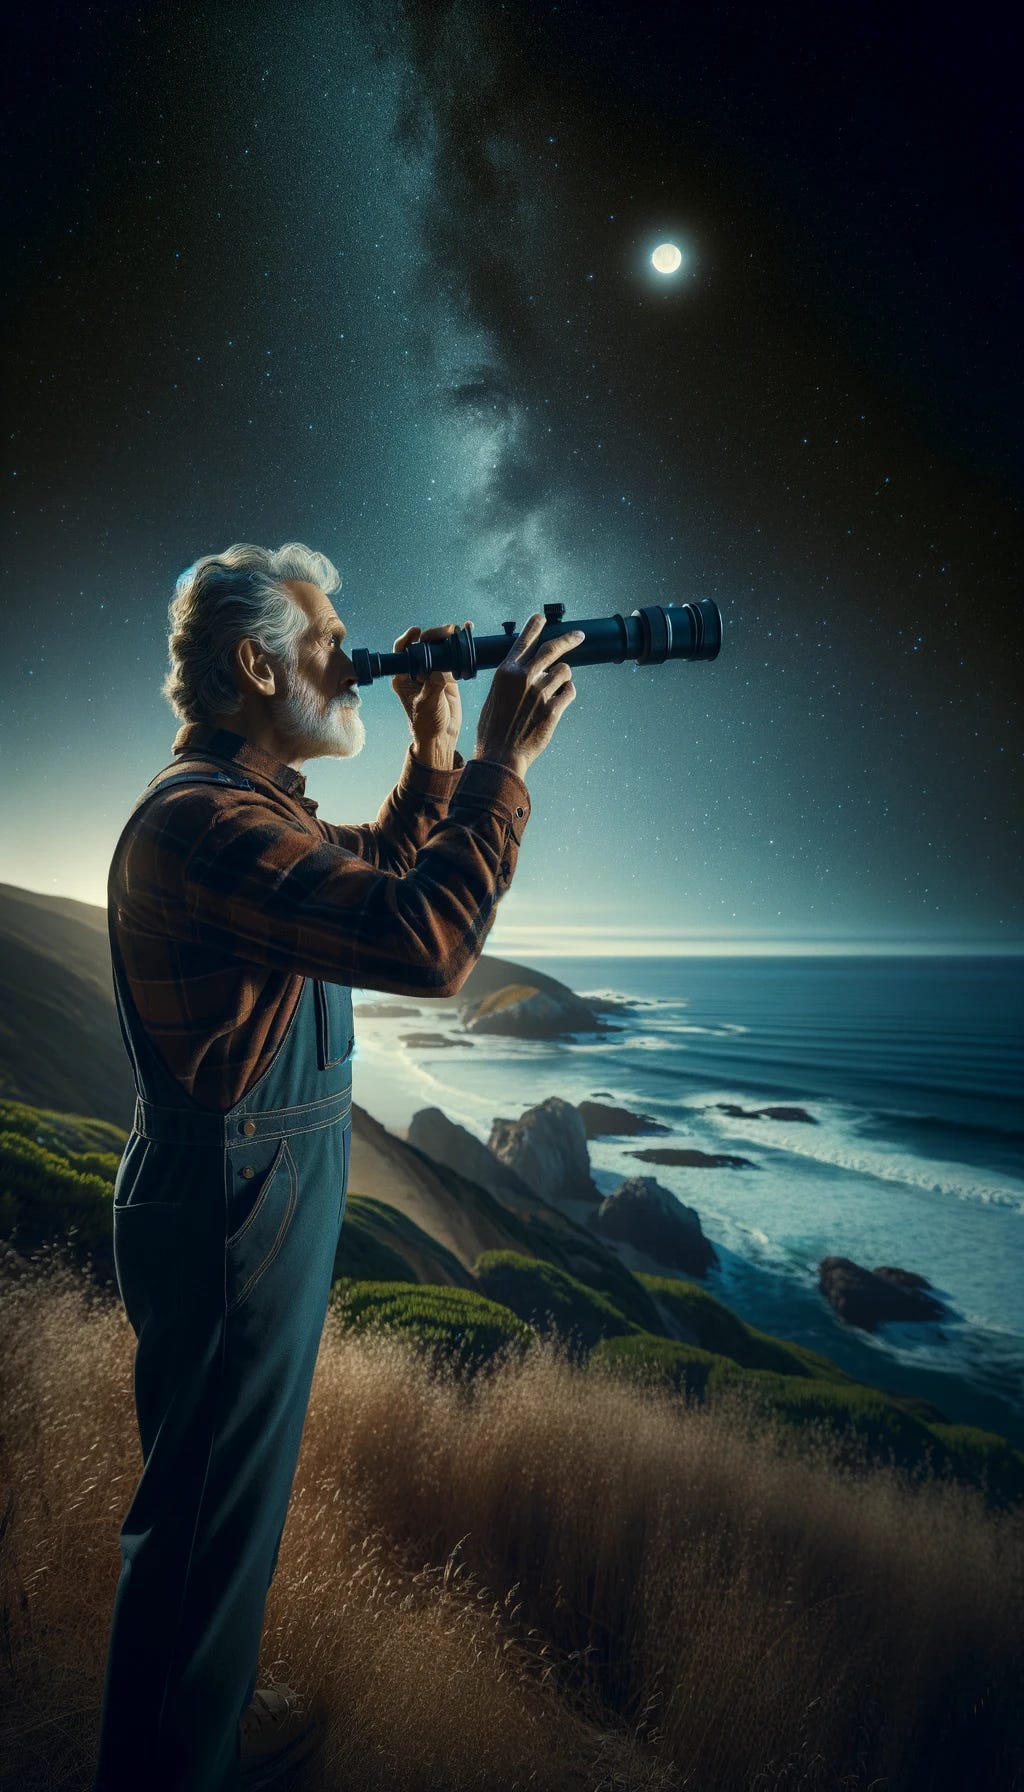 An elderly man, wearing rugged work clothes, stands on a bluff overlooking the ocean. It is night, and the sky is filled with stars. The man is using a handheld telescope to examine the night sky, deeply absorbed in his observations. The ocean waves gently crash against the rocks below, and the moonlight subtly illuminates the scene, creating a serene and contemplative atmosphere.